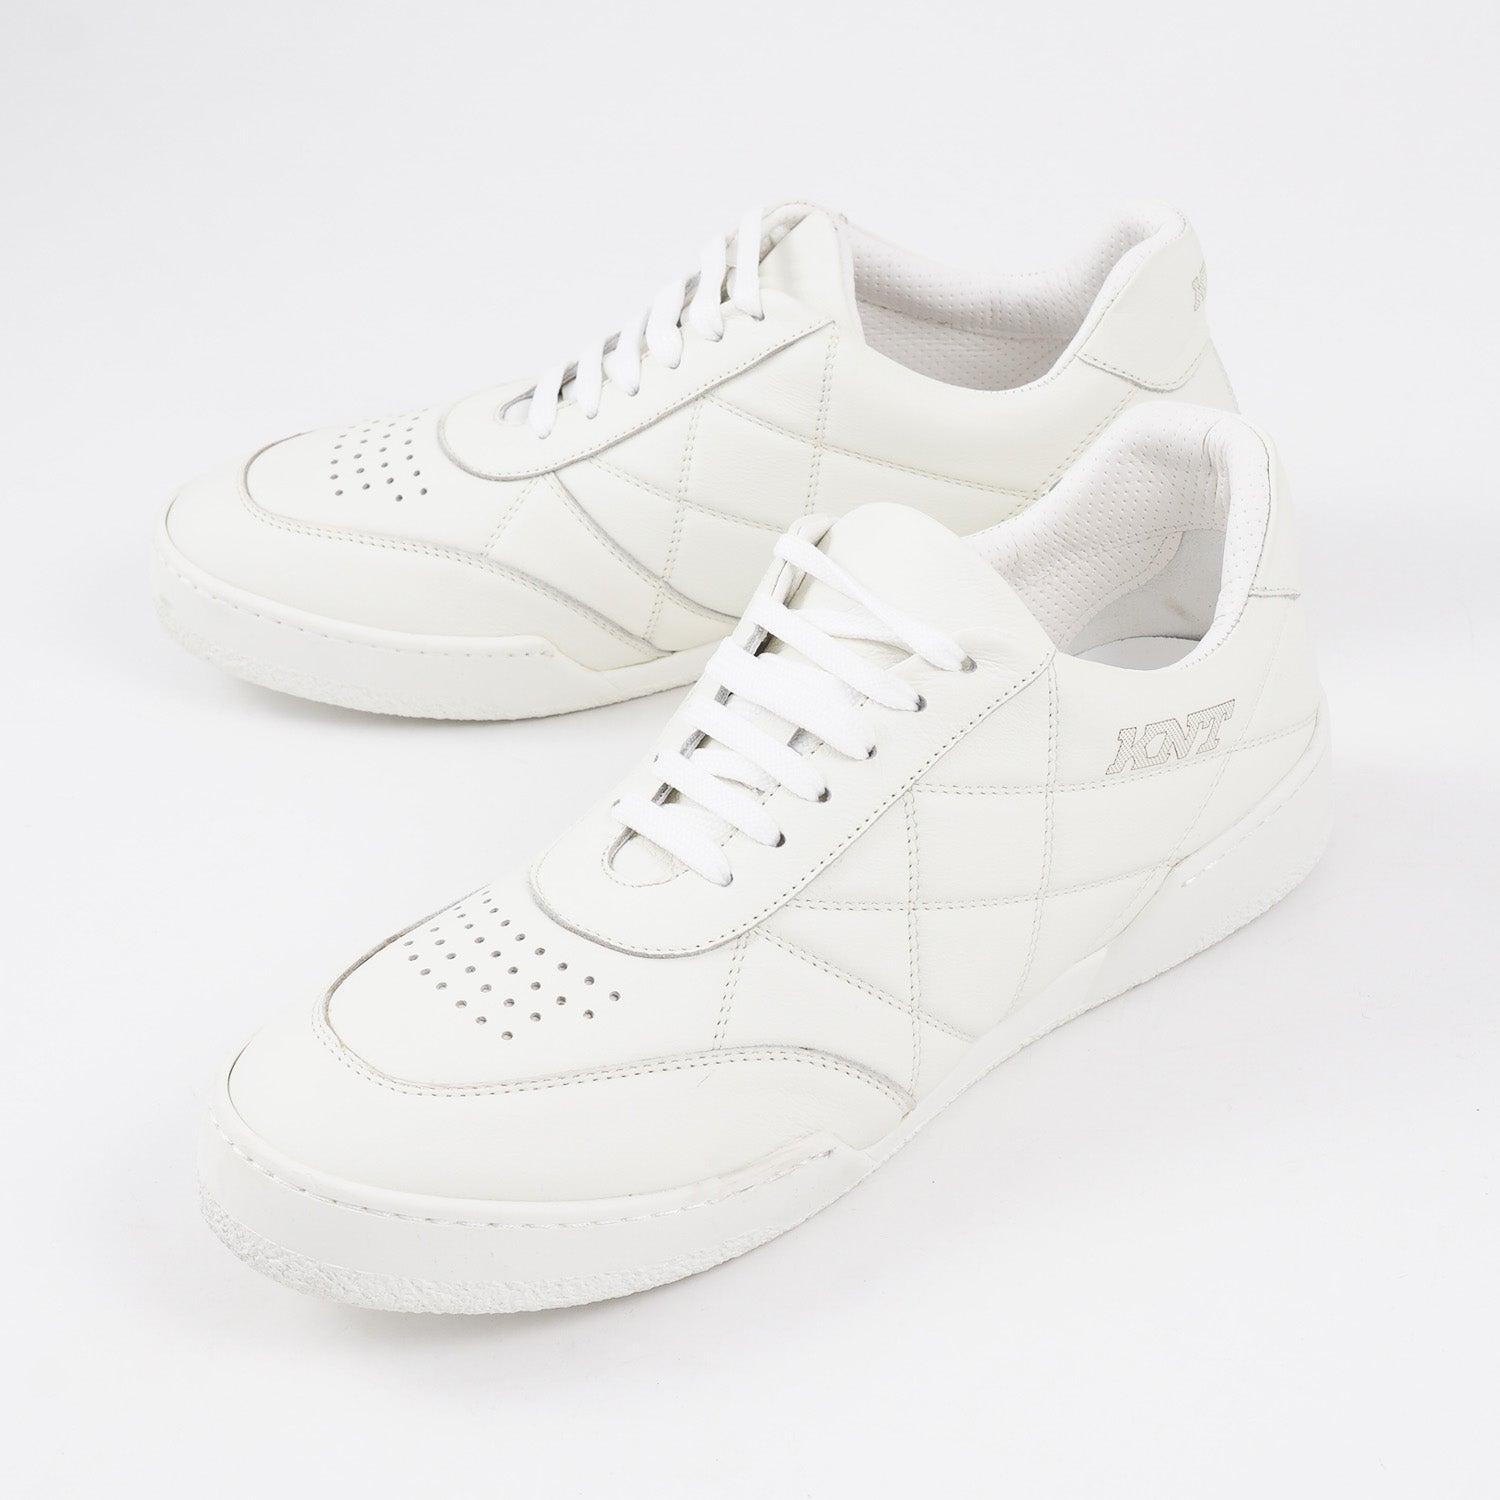 Kiton KNT Quilted Leather Sneakers - Top Shelf Apparel